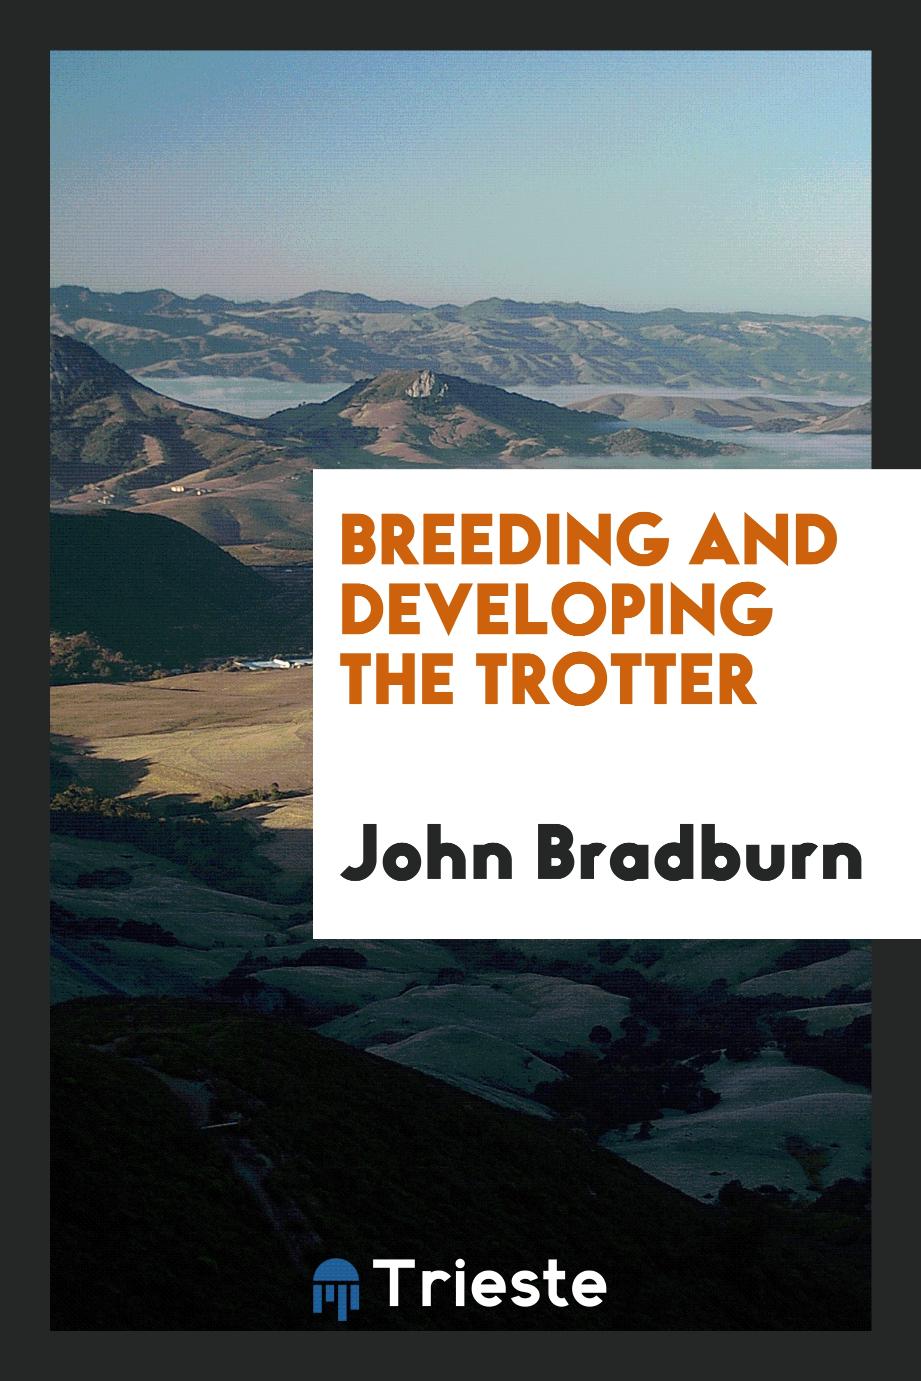 Breeding and developing the trotter